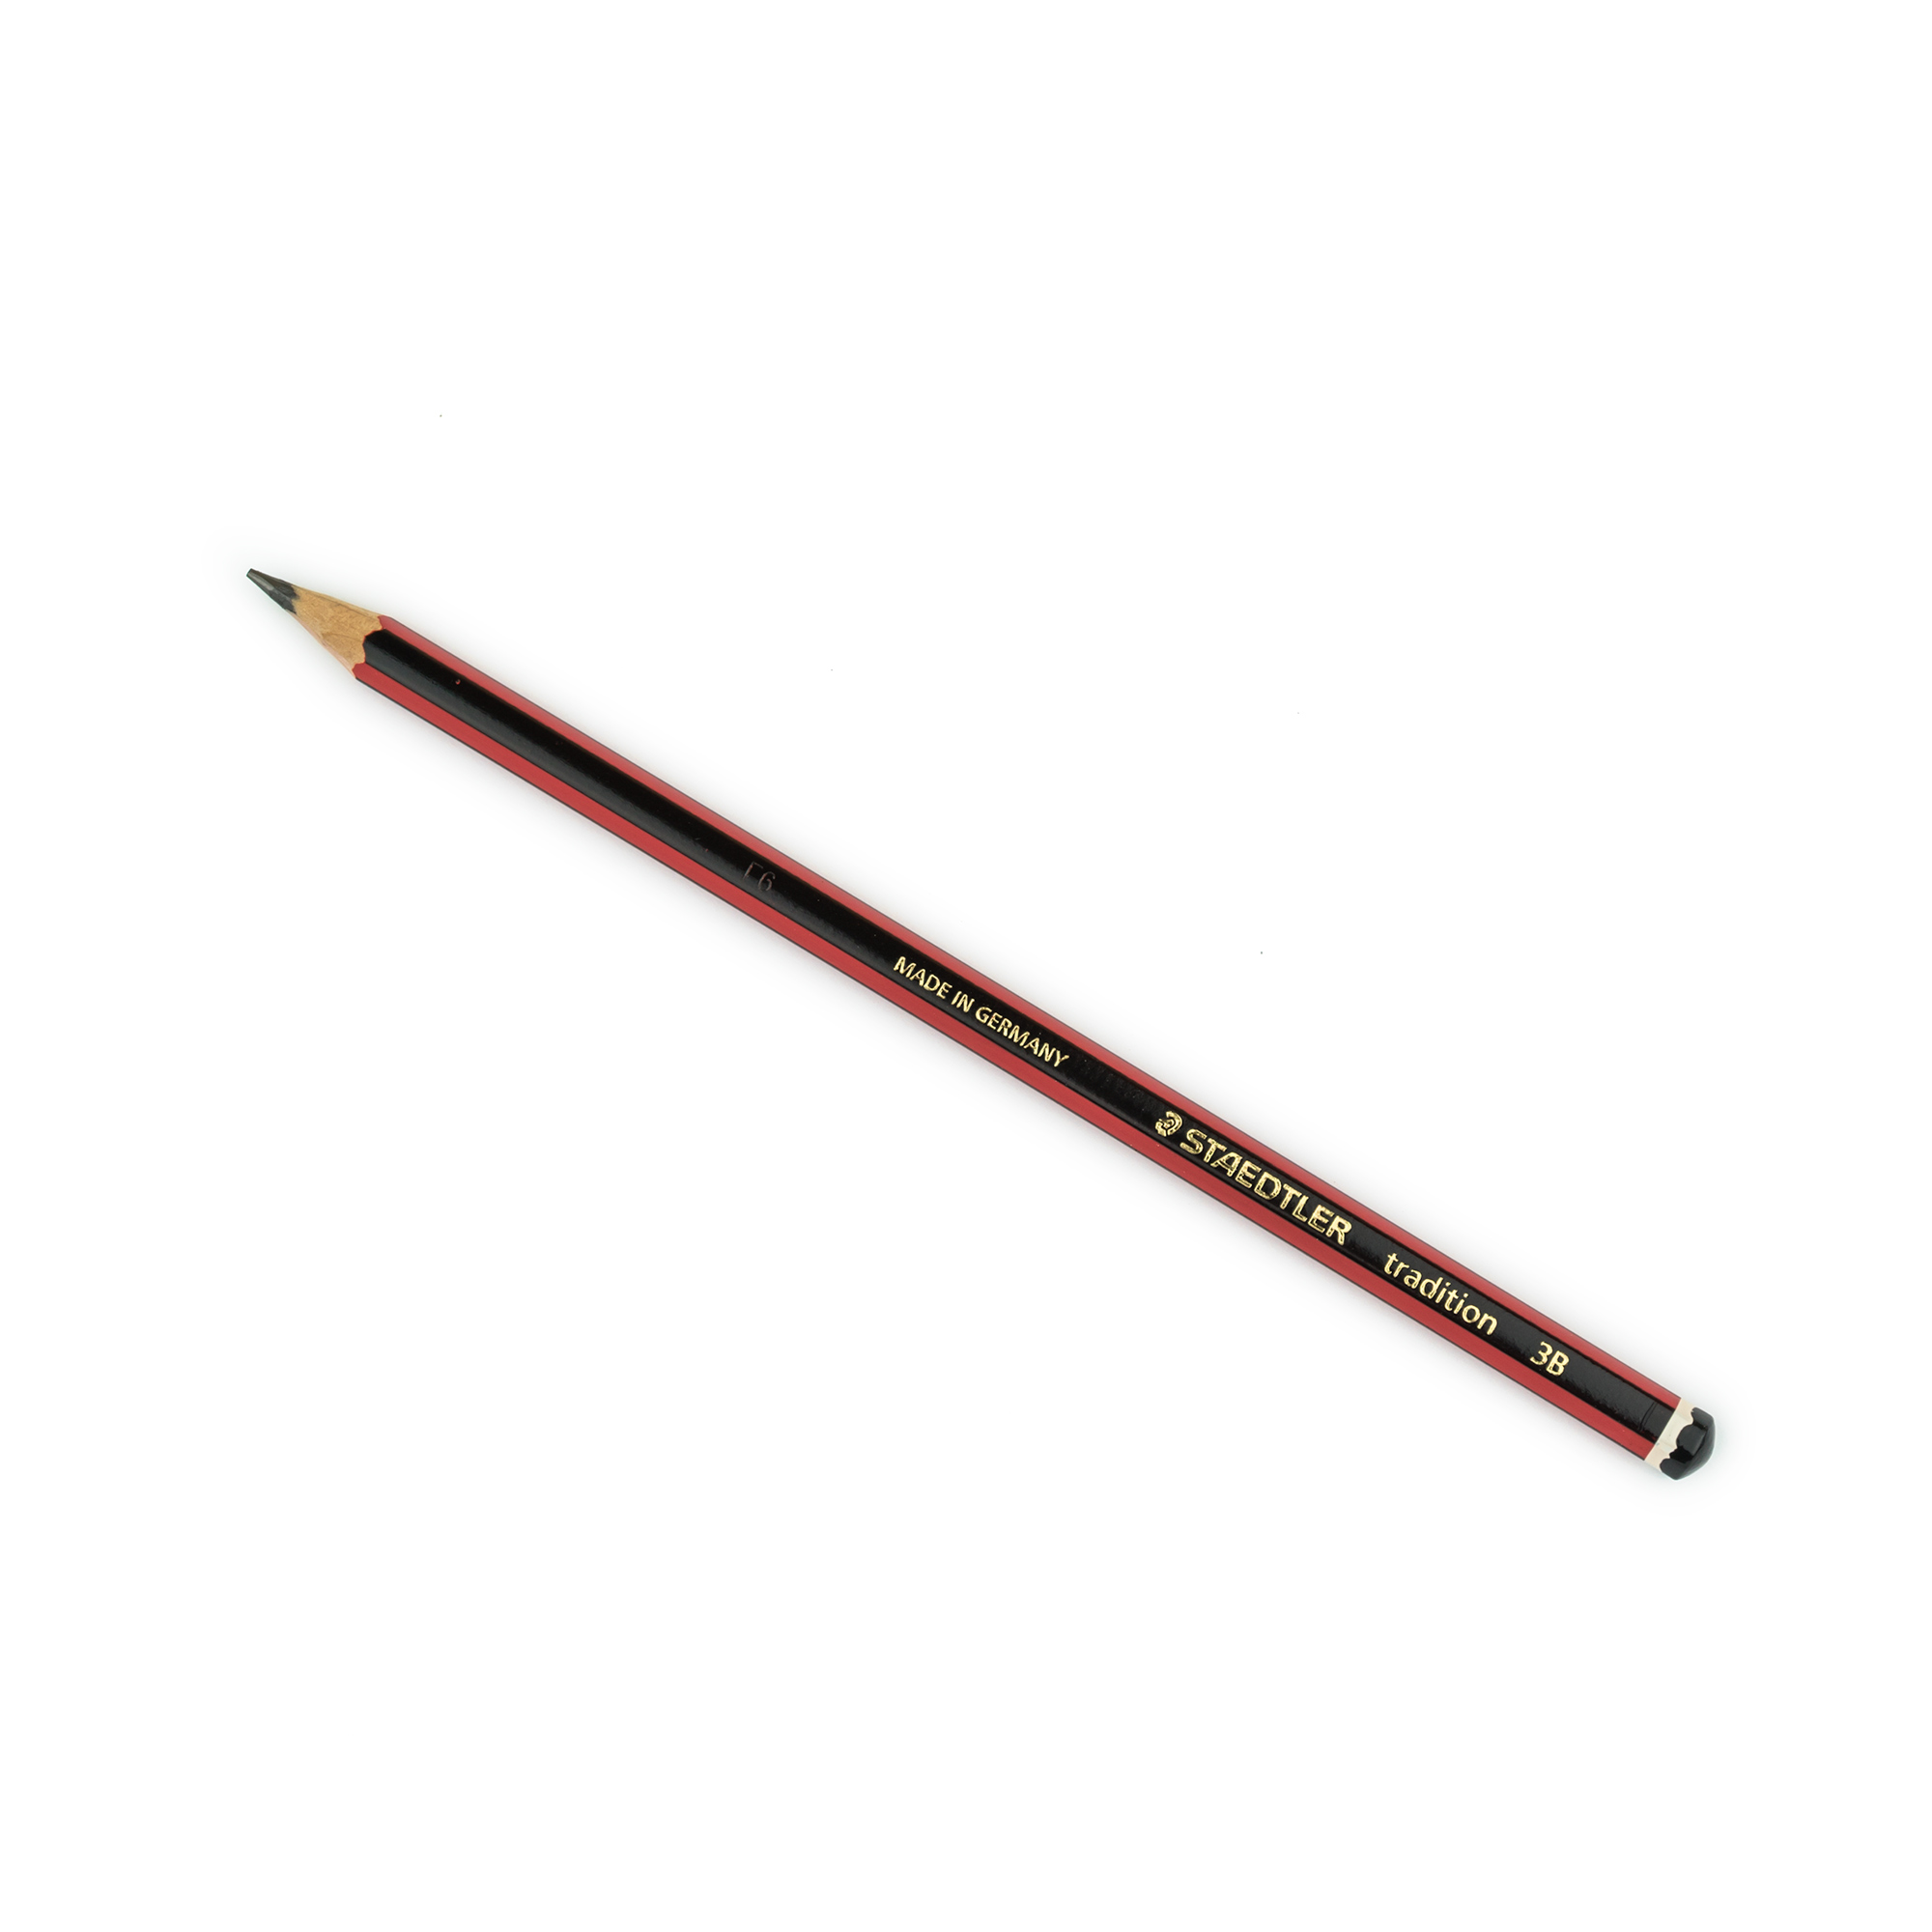 STAEDTLER 3B TRADITION PENCIL